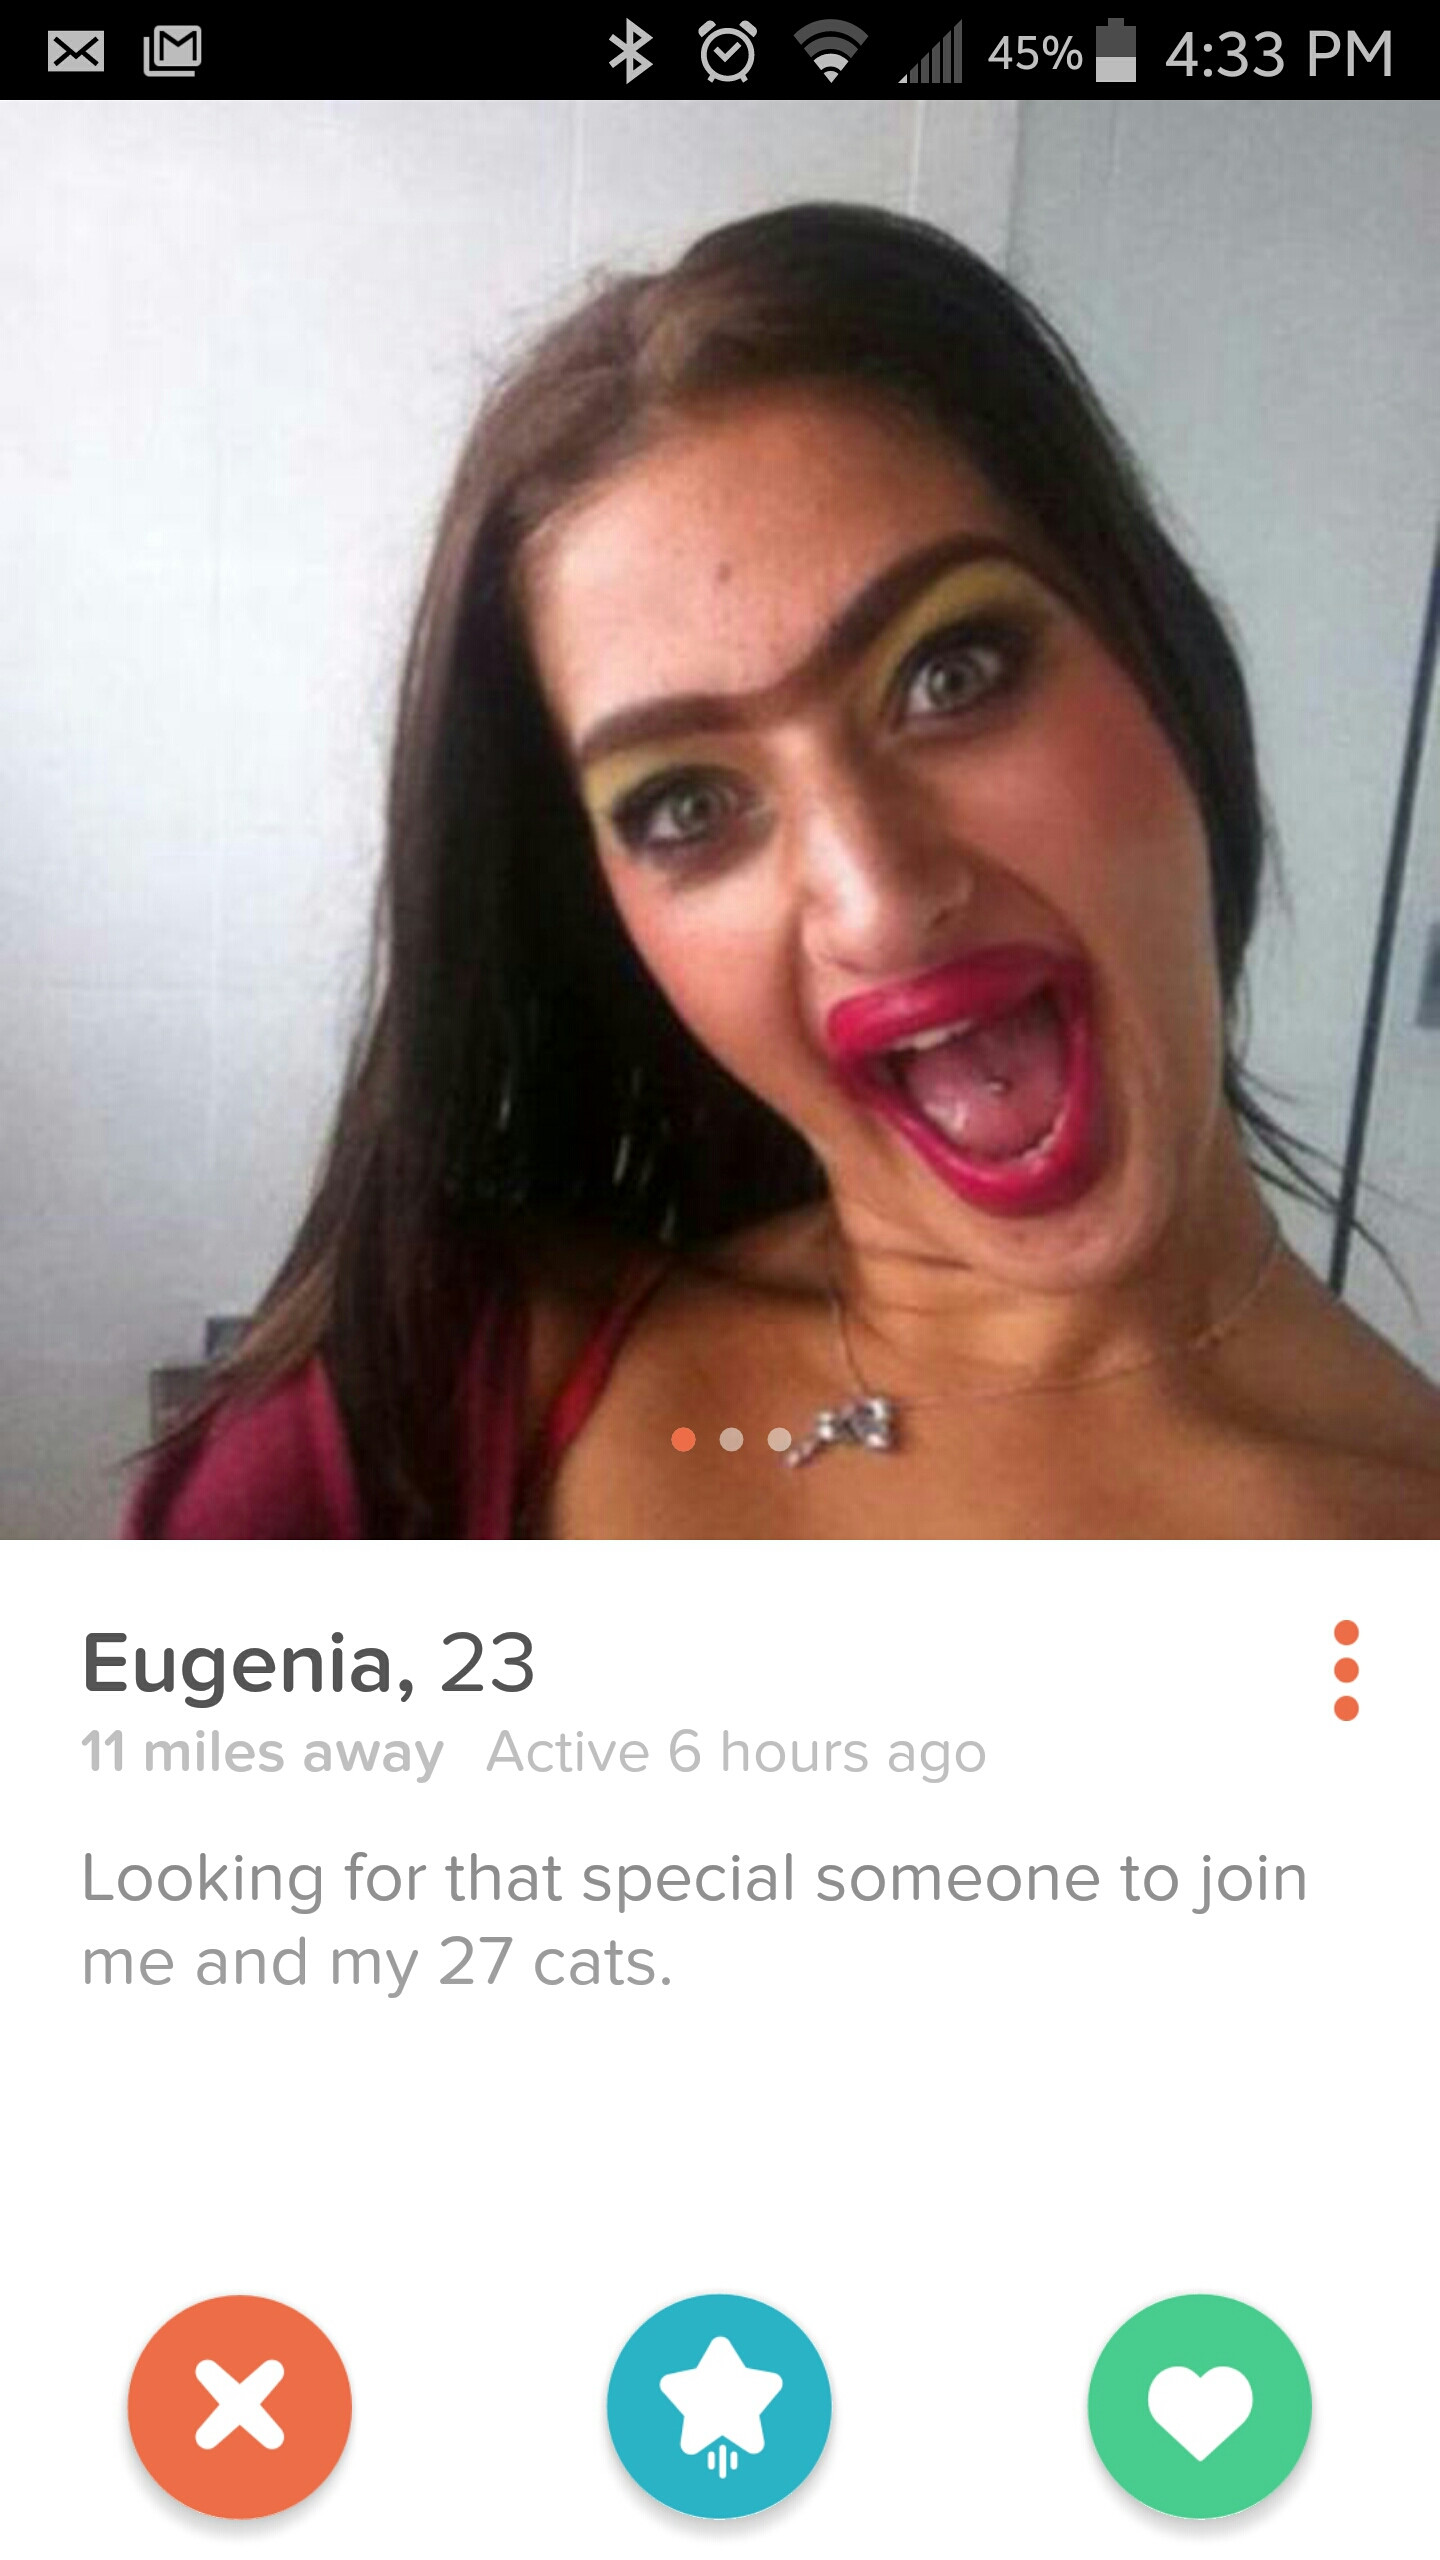 tinder - tinder wtf - ill 45% Eugenia, 23 11 miles away Active 6 hours ago Looking for that special someone to join me and my 27 cats.